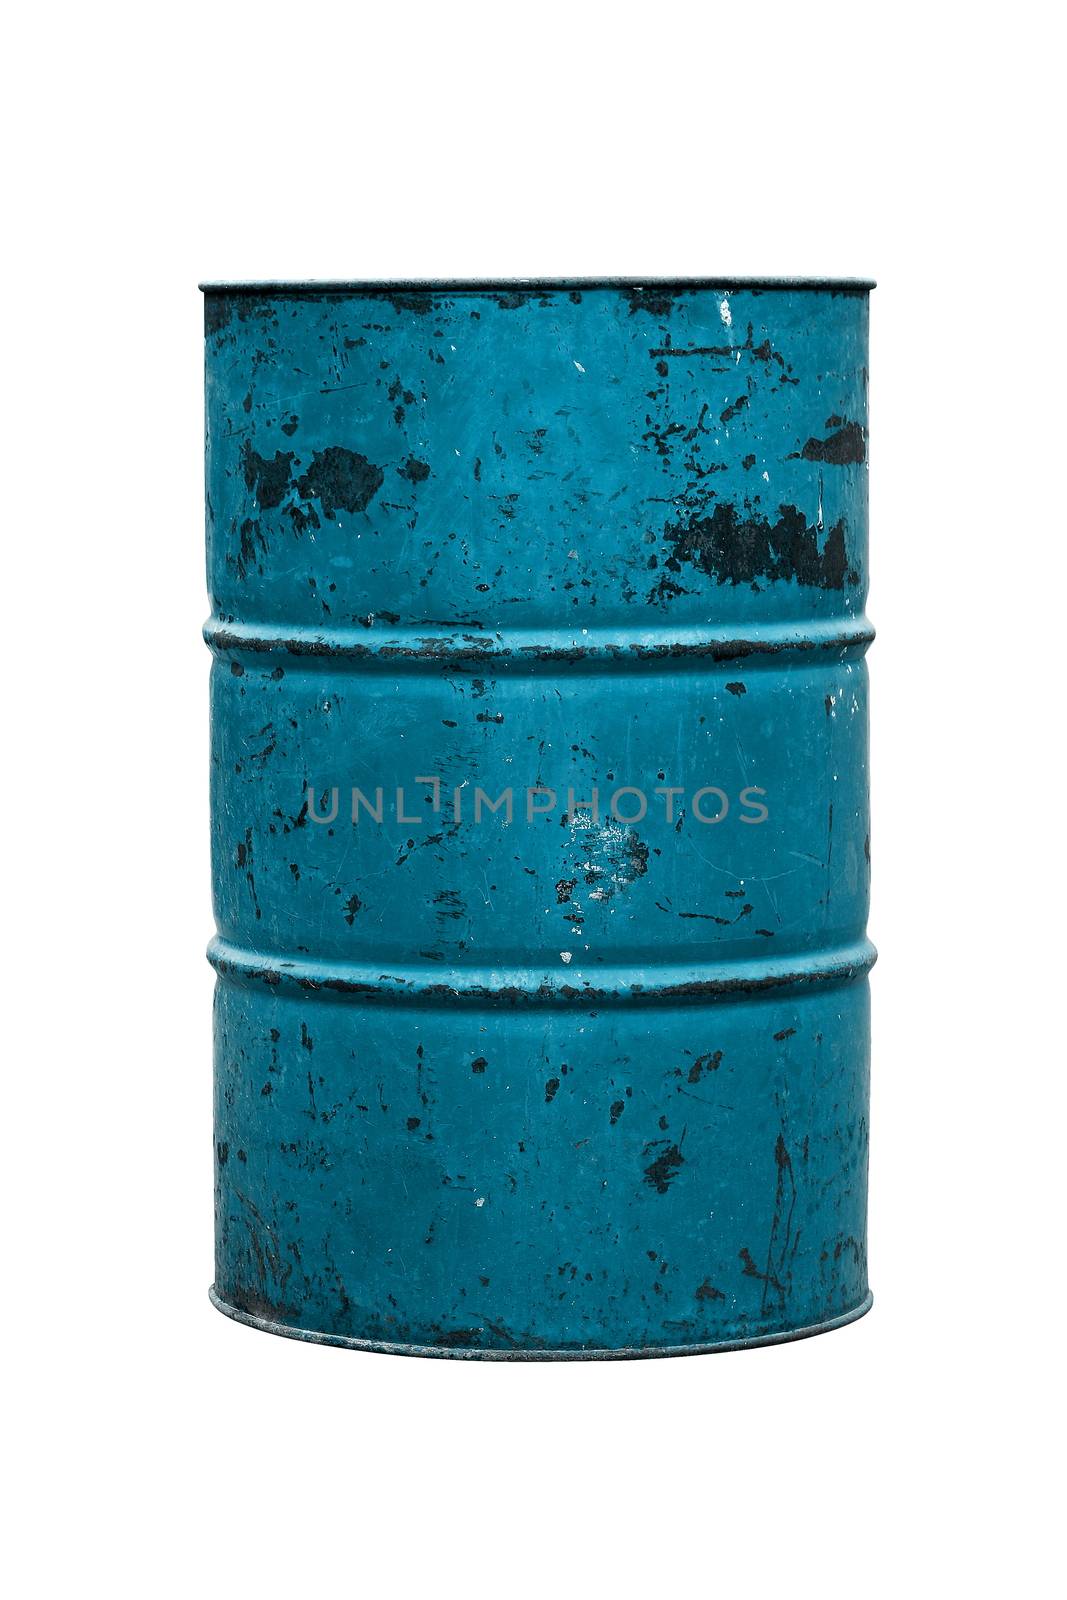 Barrel Oil blue Old isolated on background white